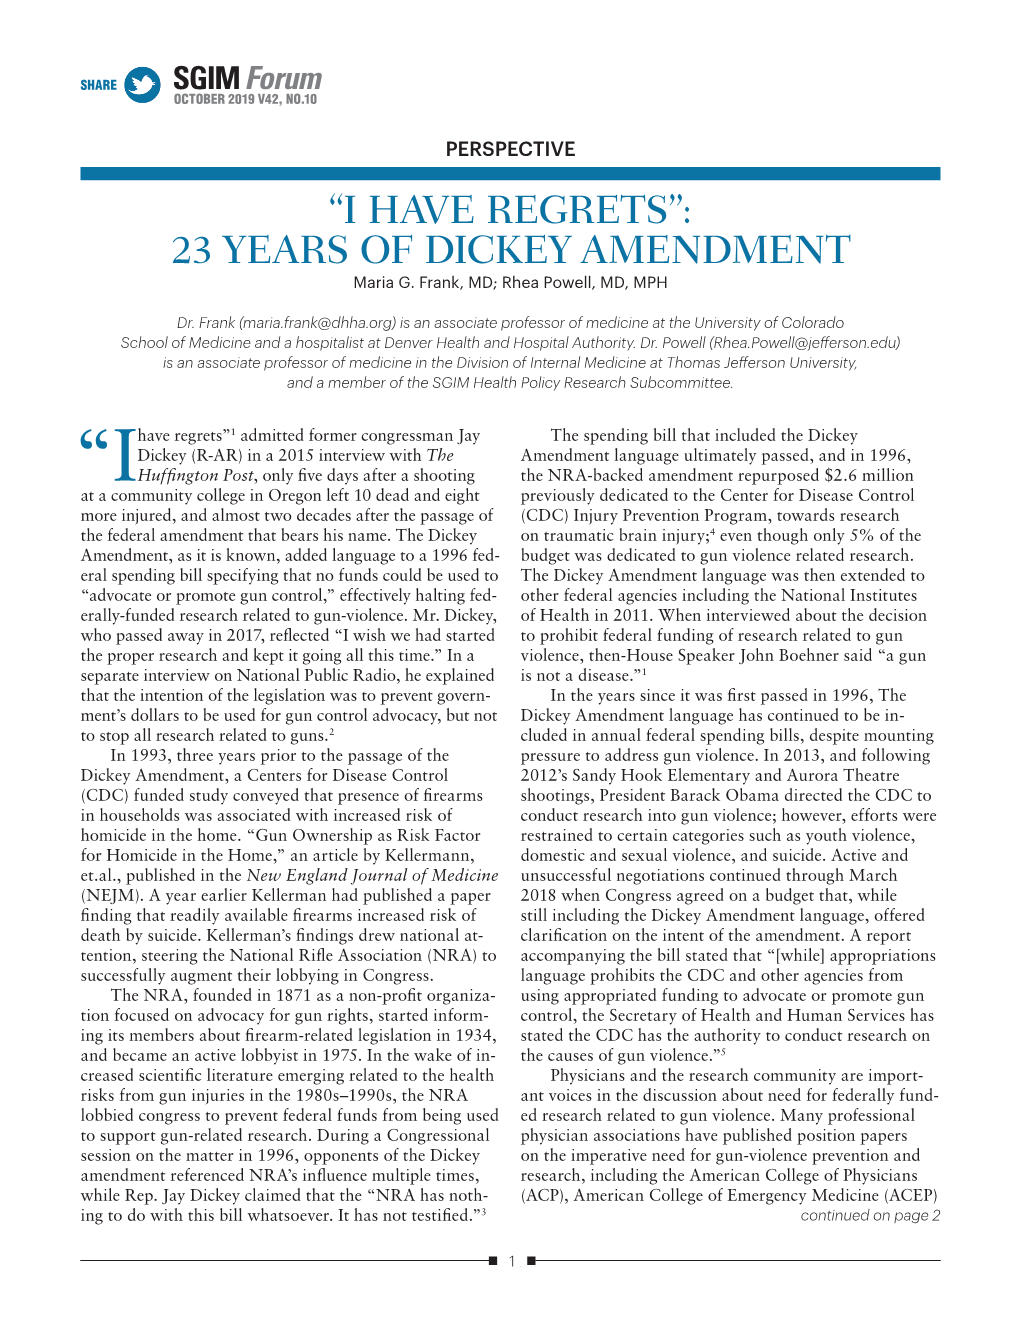 “I HAVE REGRETS”: 23 YEARS of DICKEY AMENDMENT Maria G